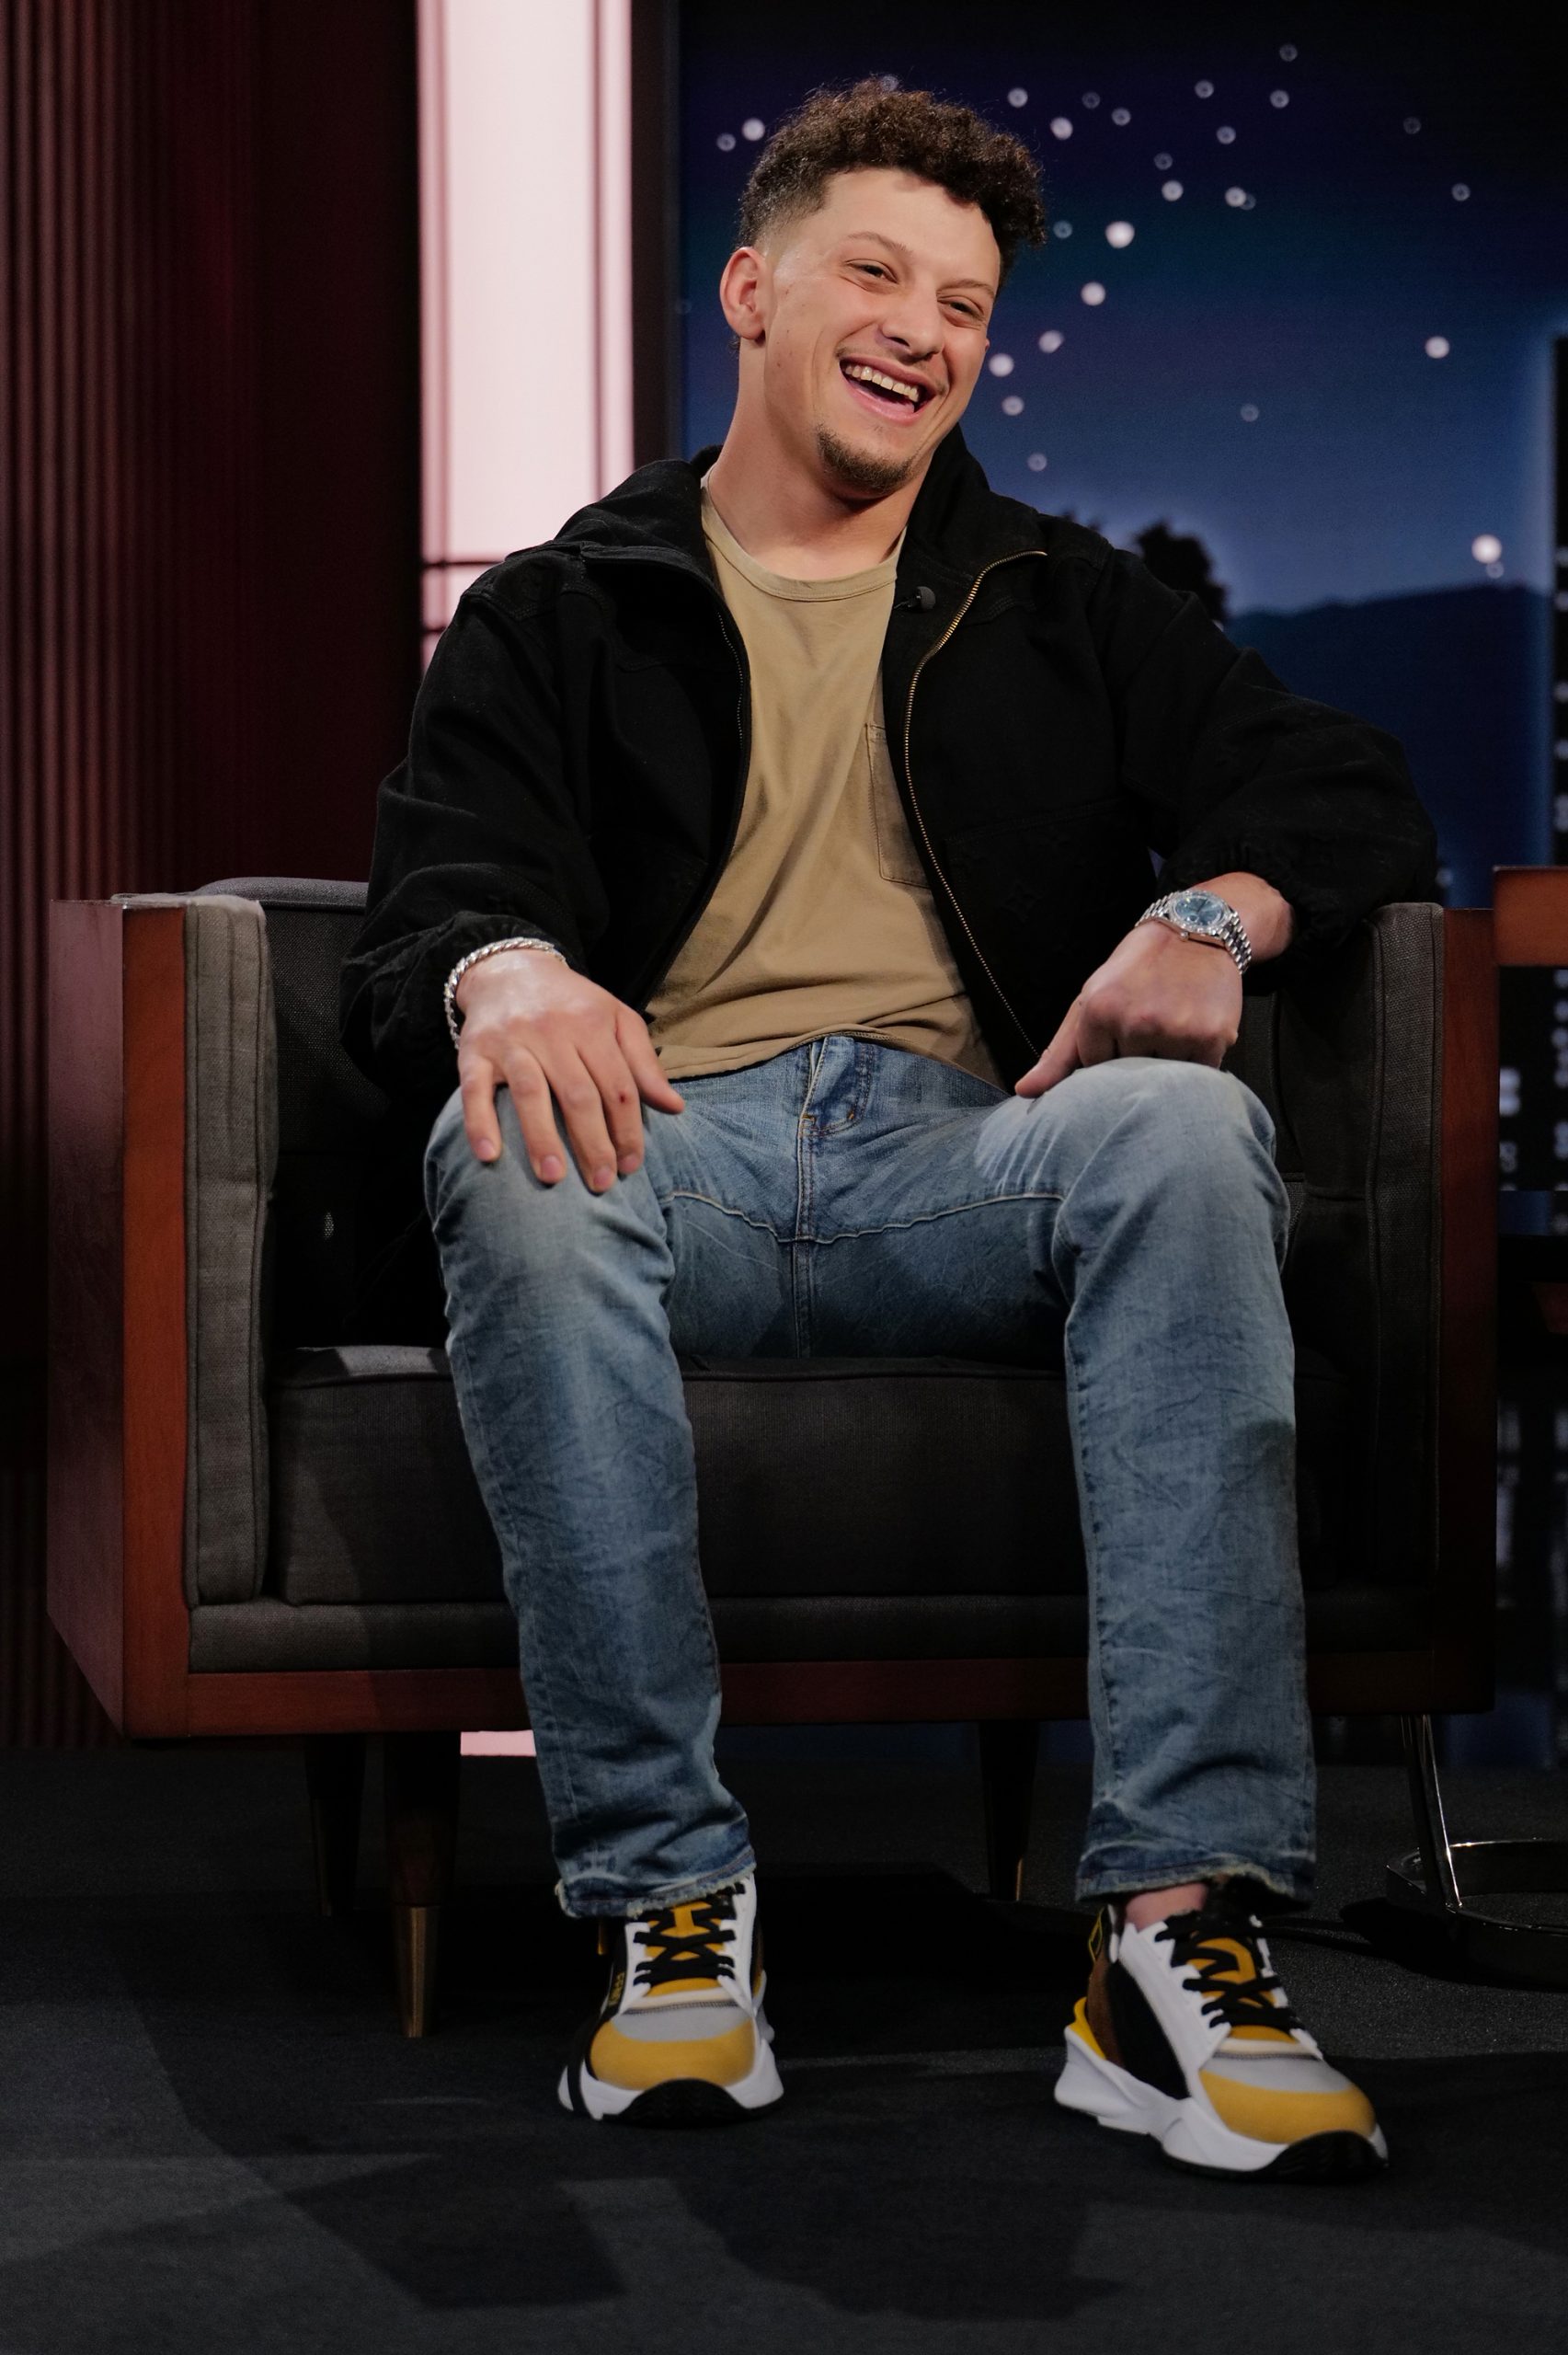 In Case You Missed It: Patrick Mahomes On ‘Jimmy Kimmel Live’